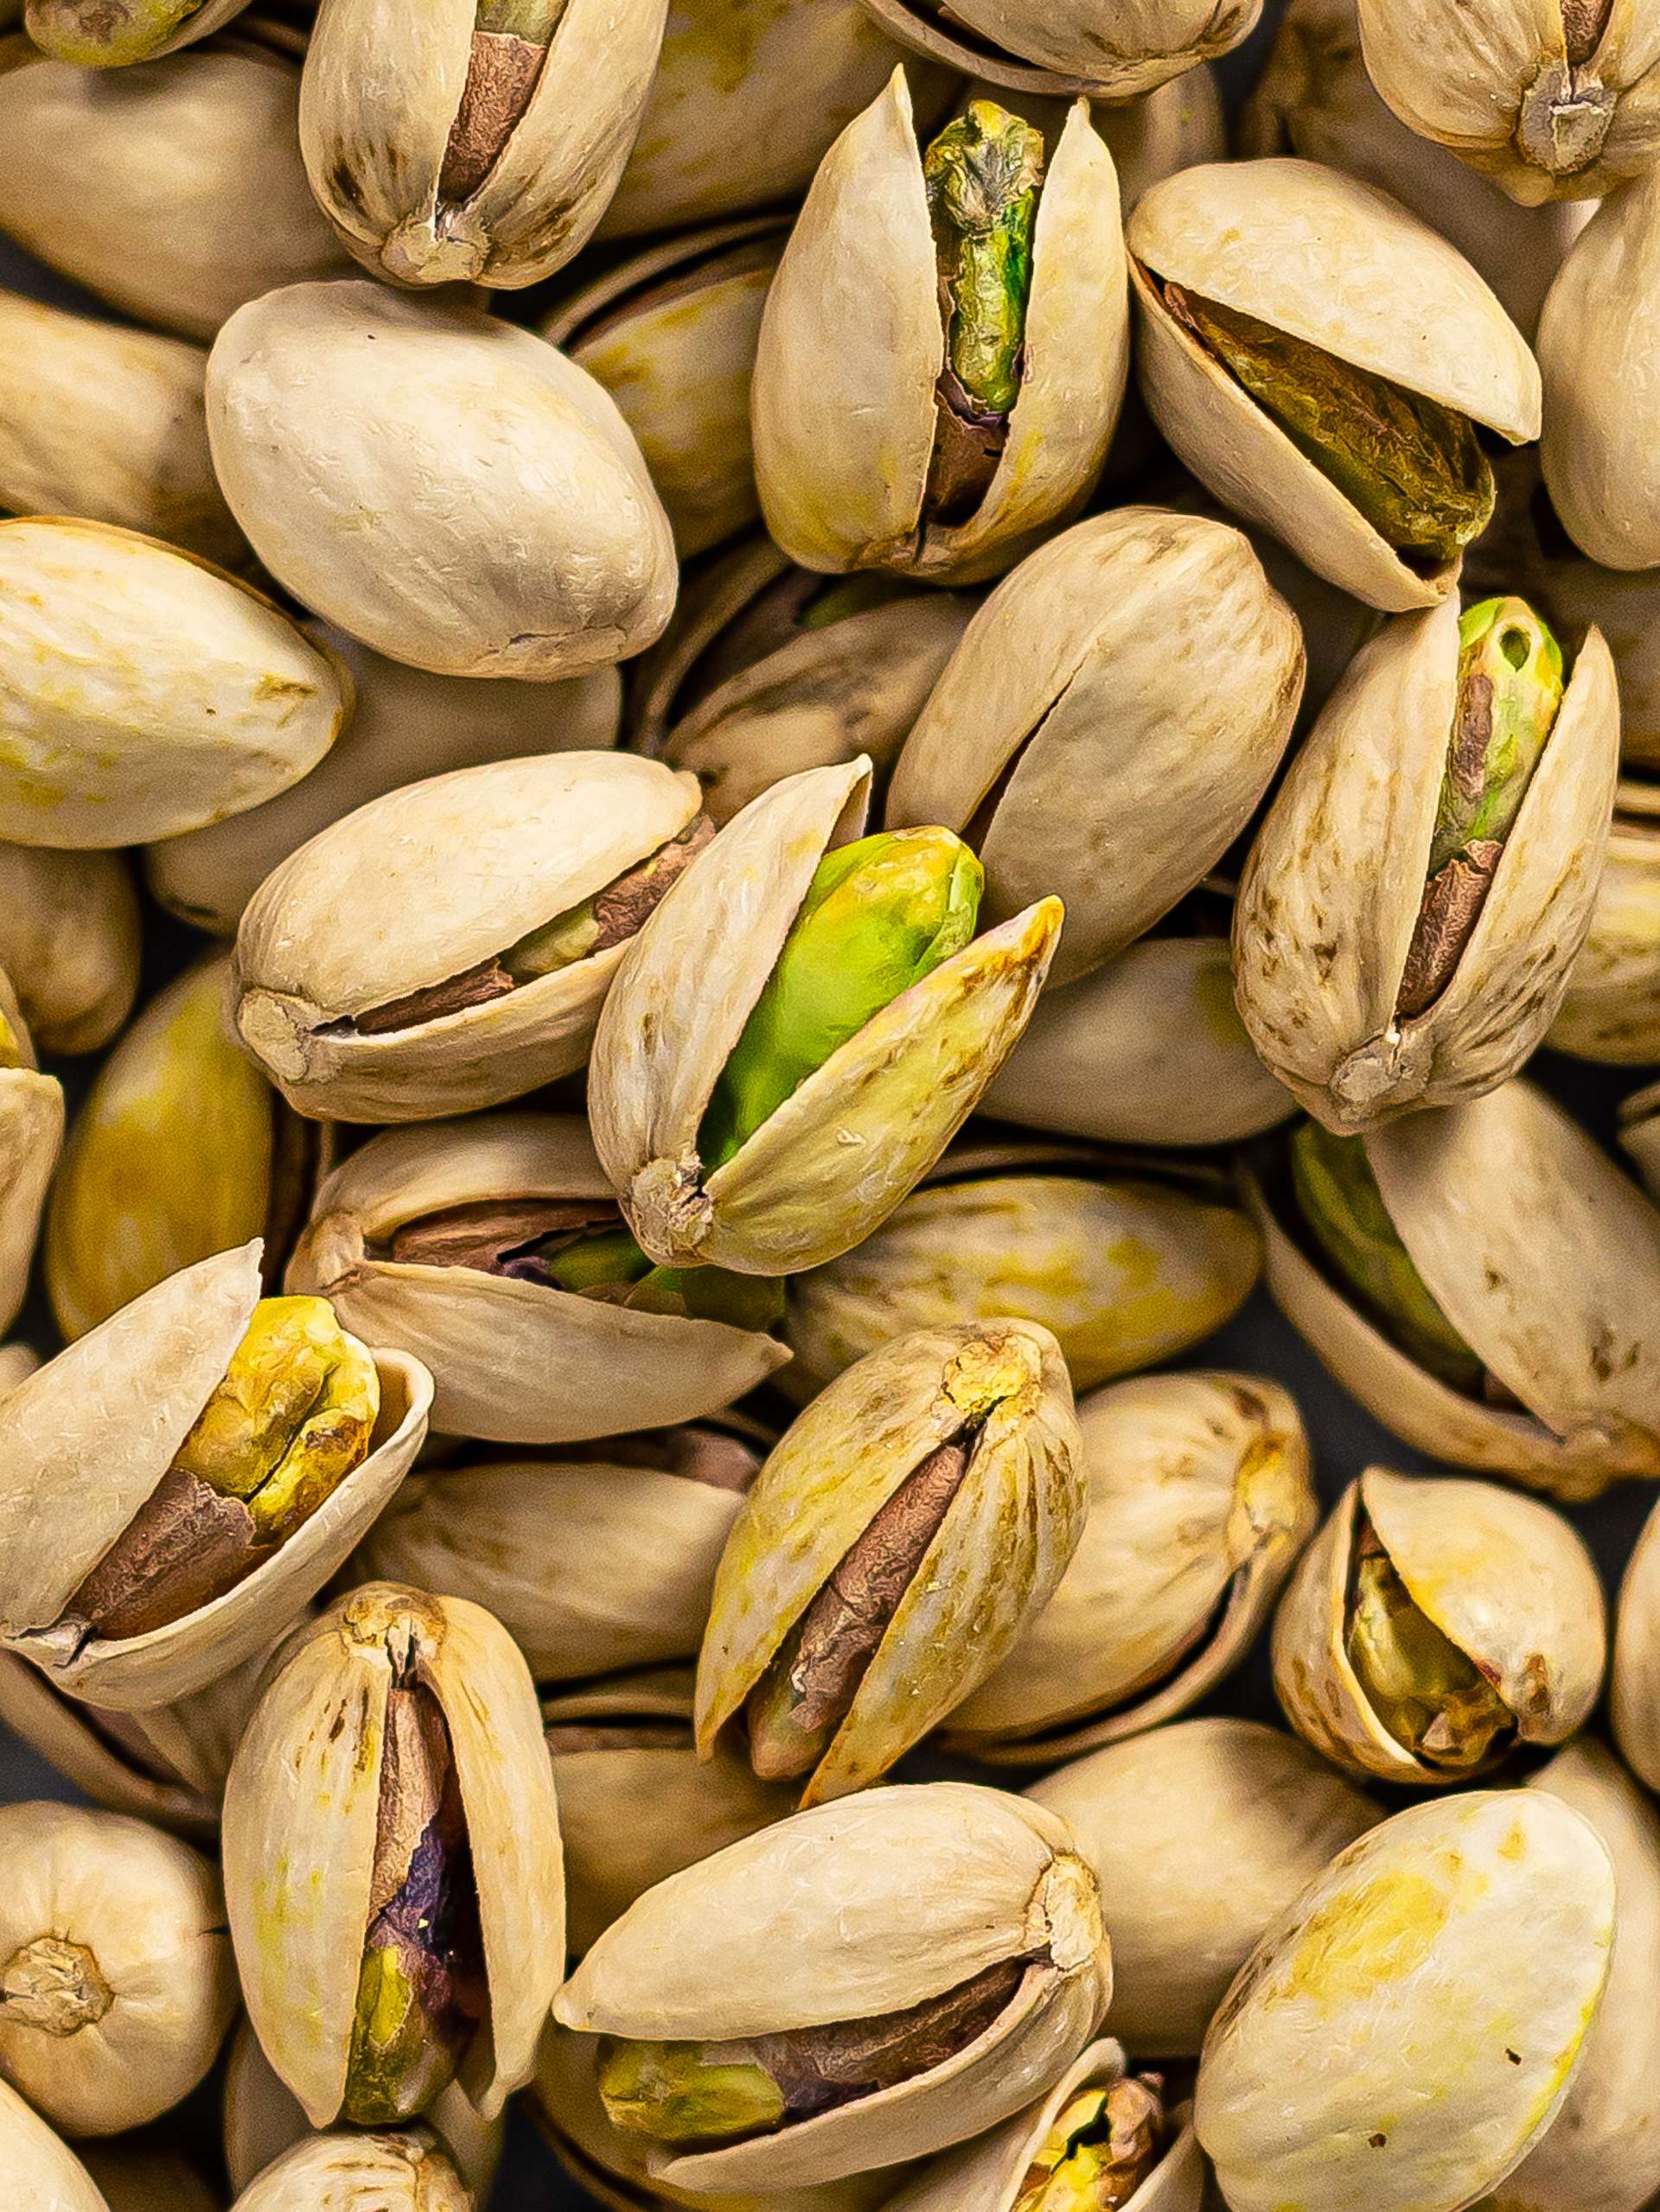 3 Reasons Why You Should Add Pistachios To Your Diet